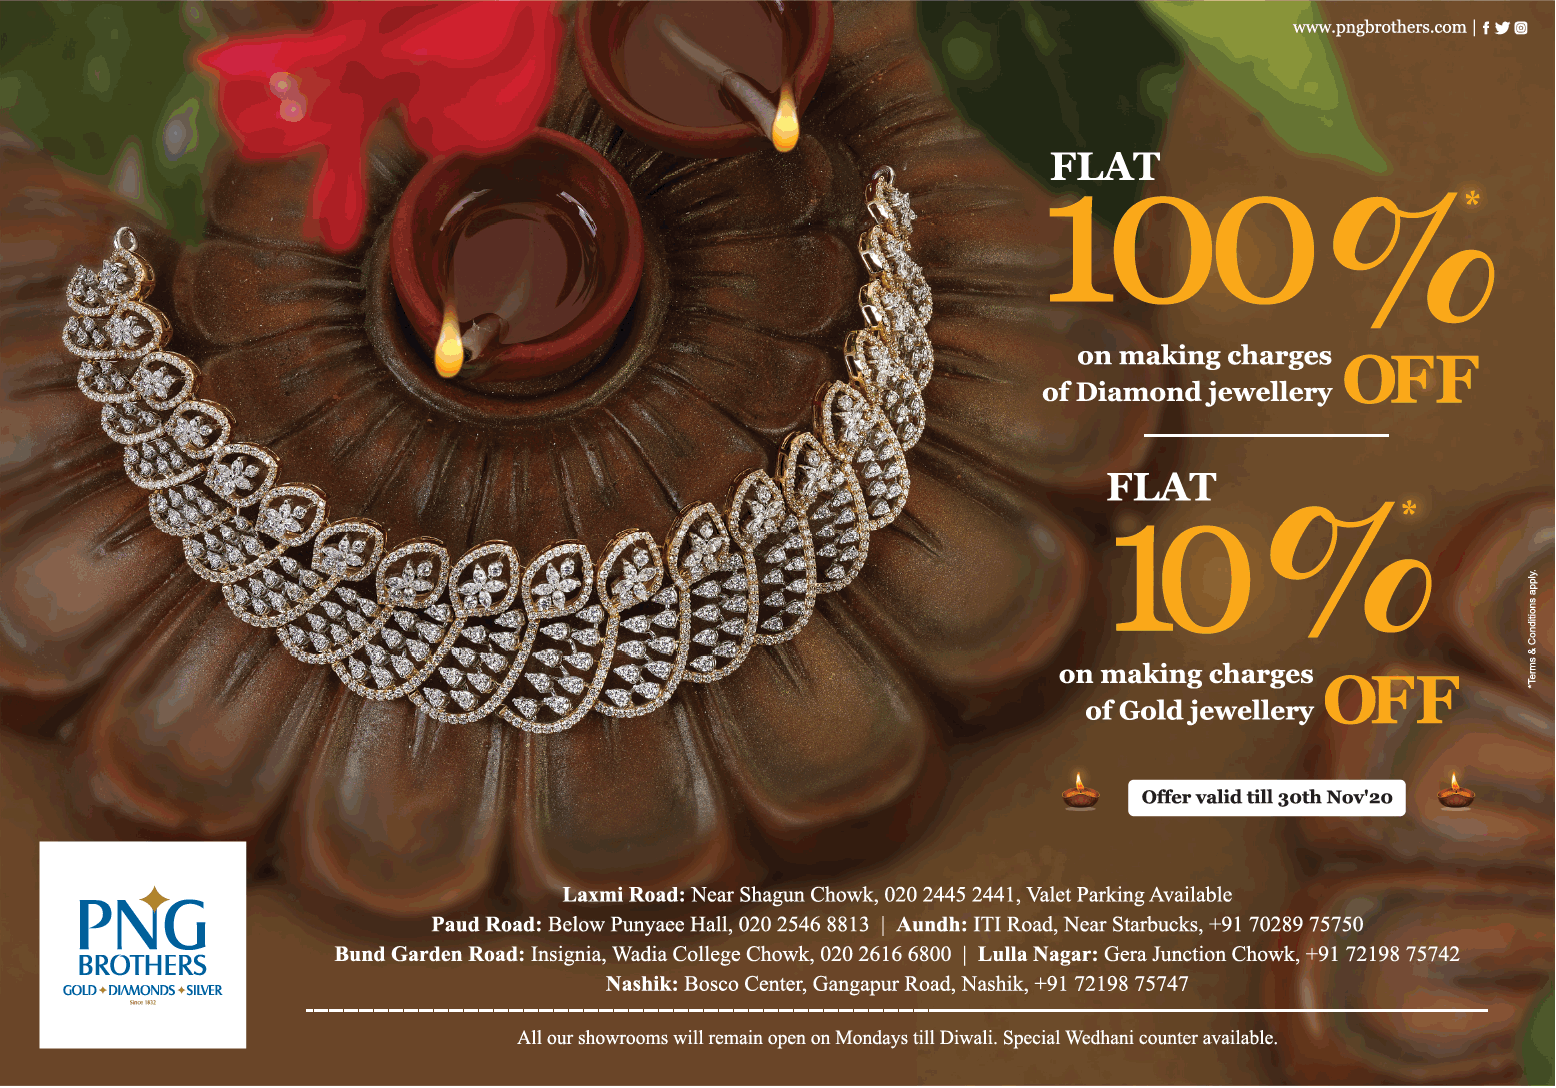 p-n-g-brothers-flat-100%-off-on-making-charges-of-diamond-jewellery-ad-toi-pune-13-11-2020